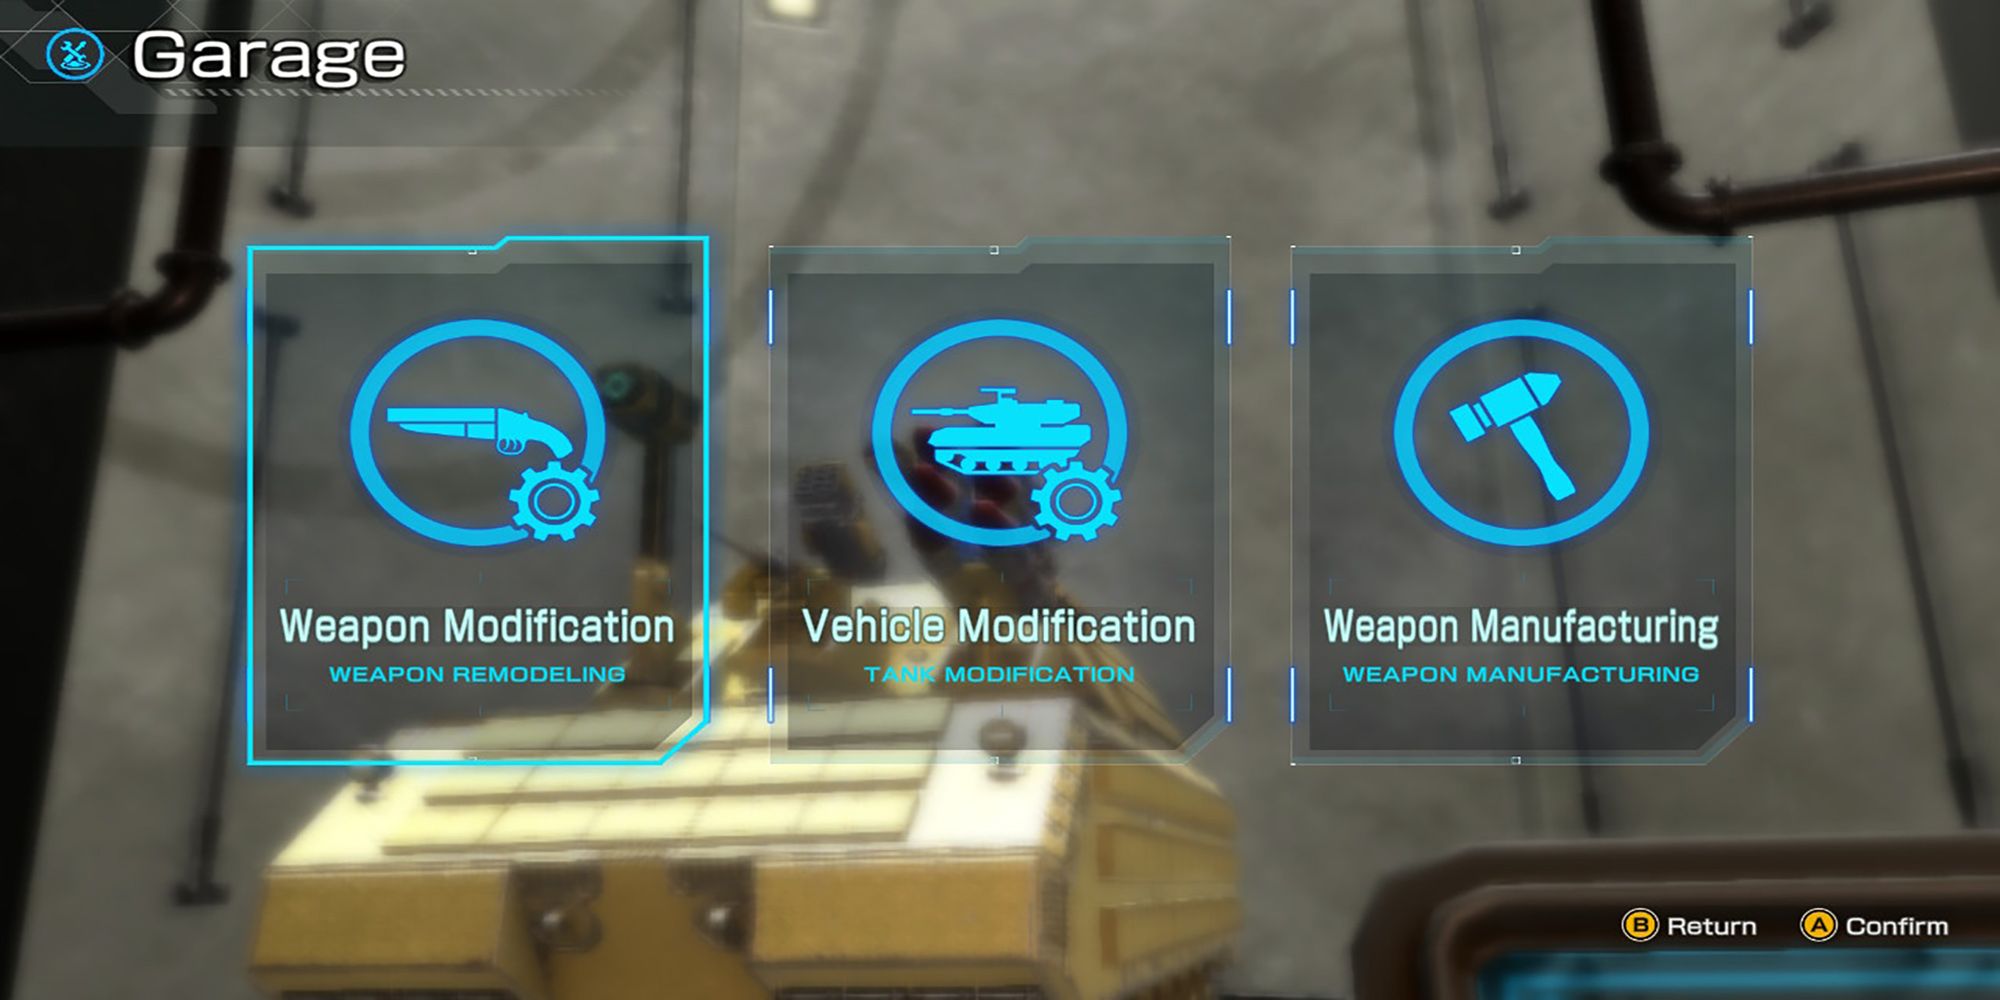 Weapon Modification, Vehicle Modification, and Weapon Manufacturing are the three menus available in the Sortie Garage in Metal Max Xeno Reborn.